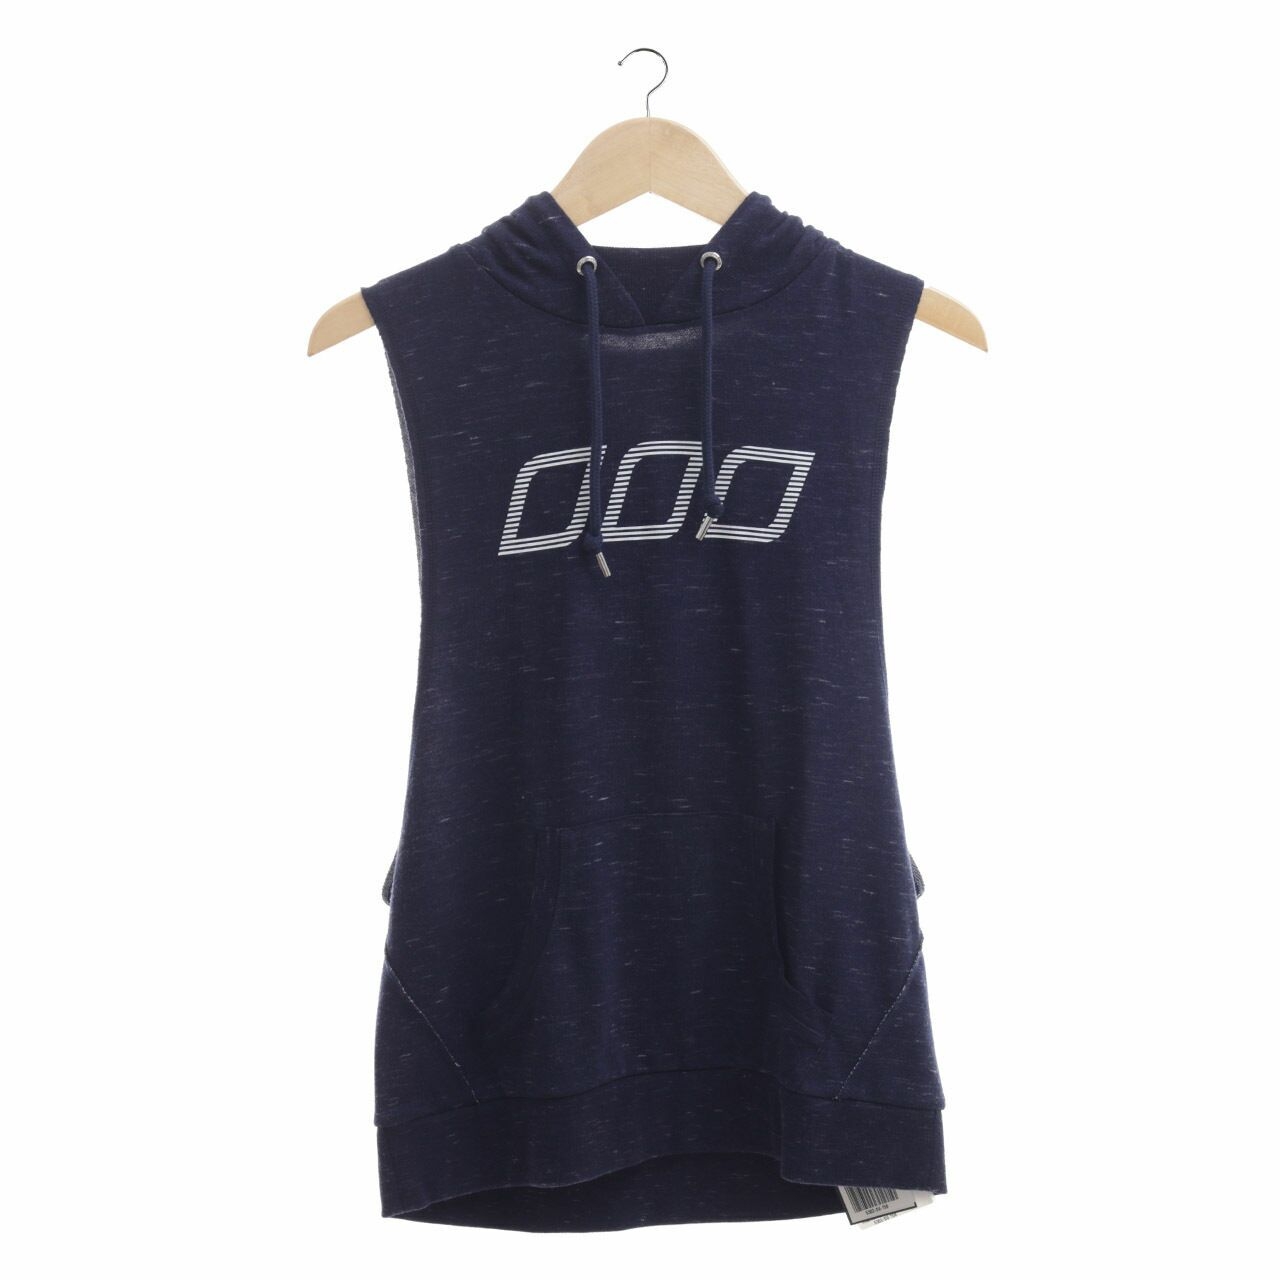 Uniquely Lorna Jane Navy Sleeveless With Hoodie 